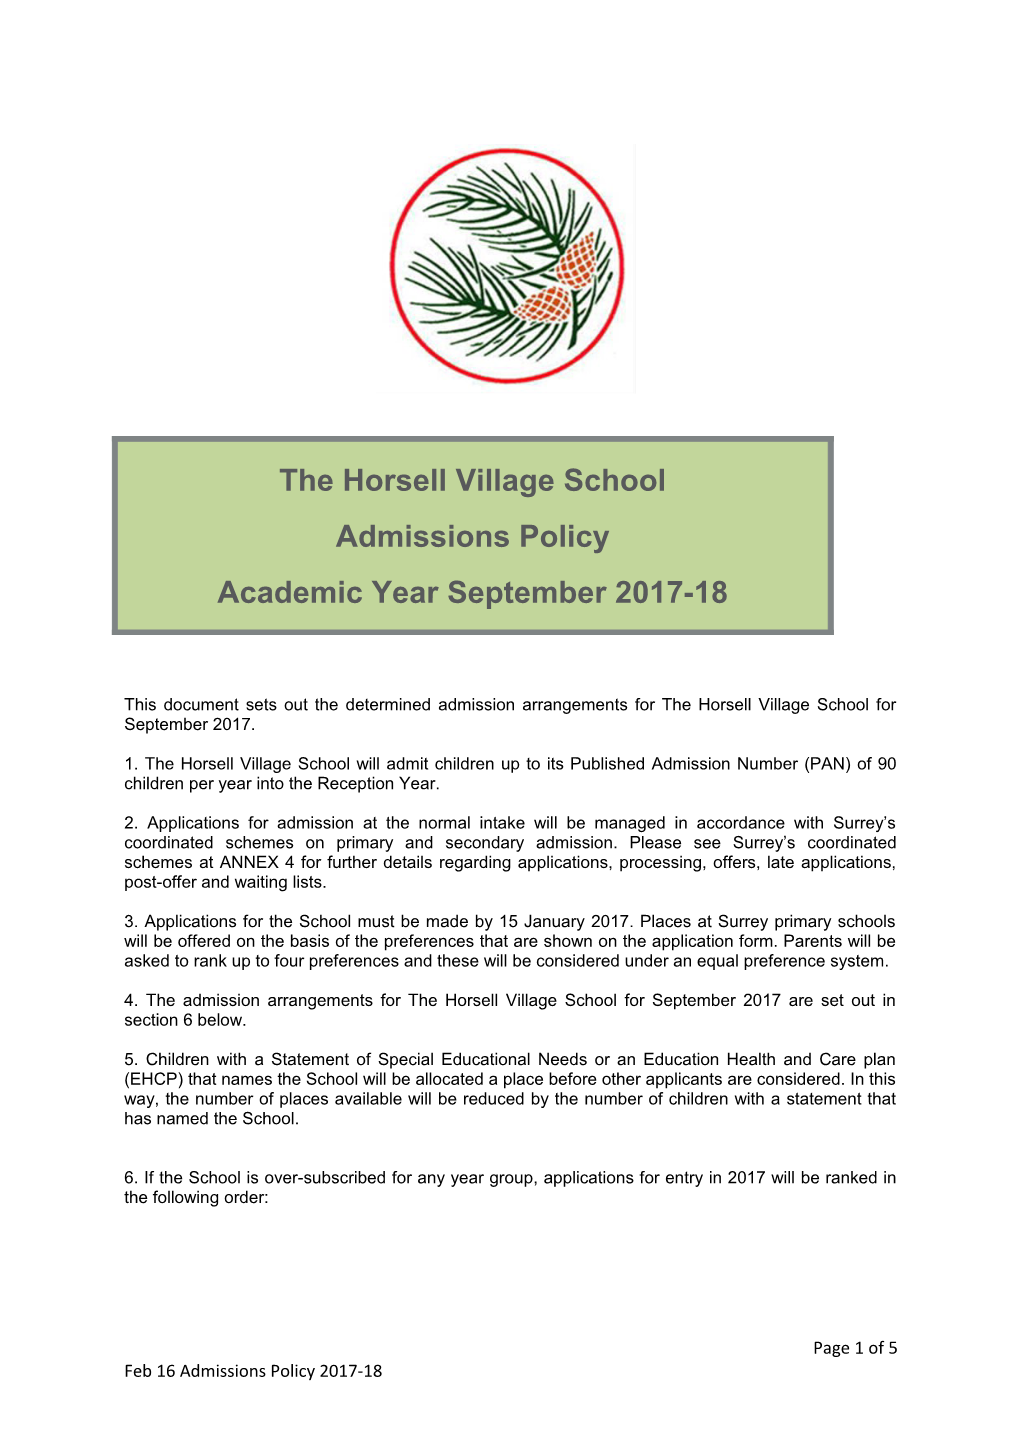 1. the Horsell Village School Will Admit Children up to Its Published Admission Number